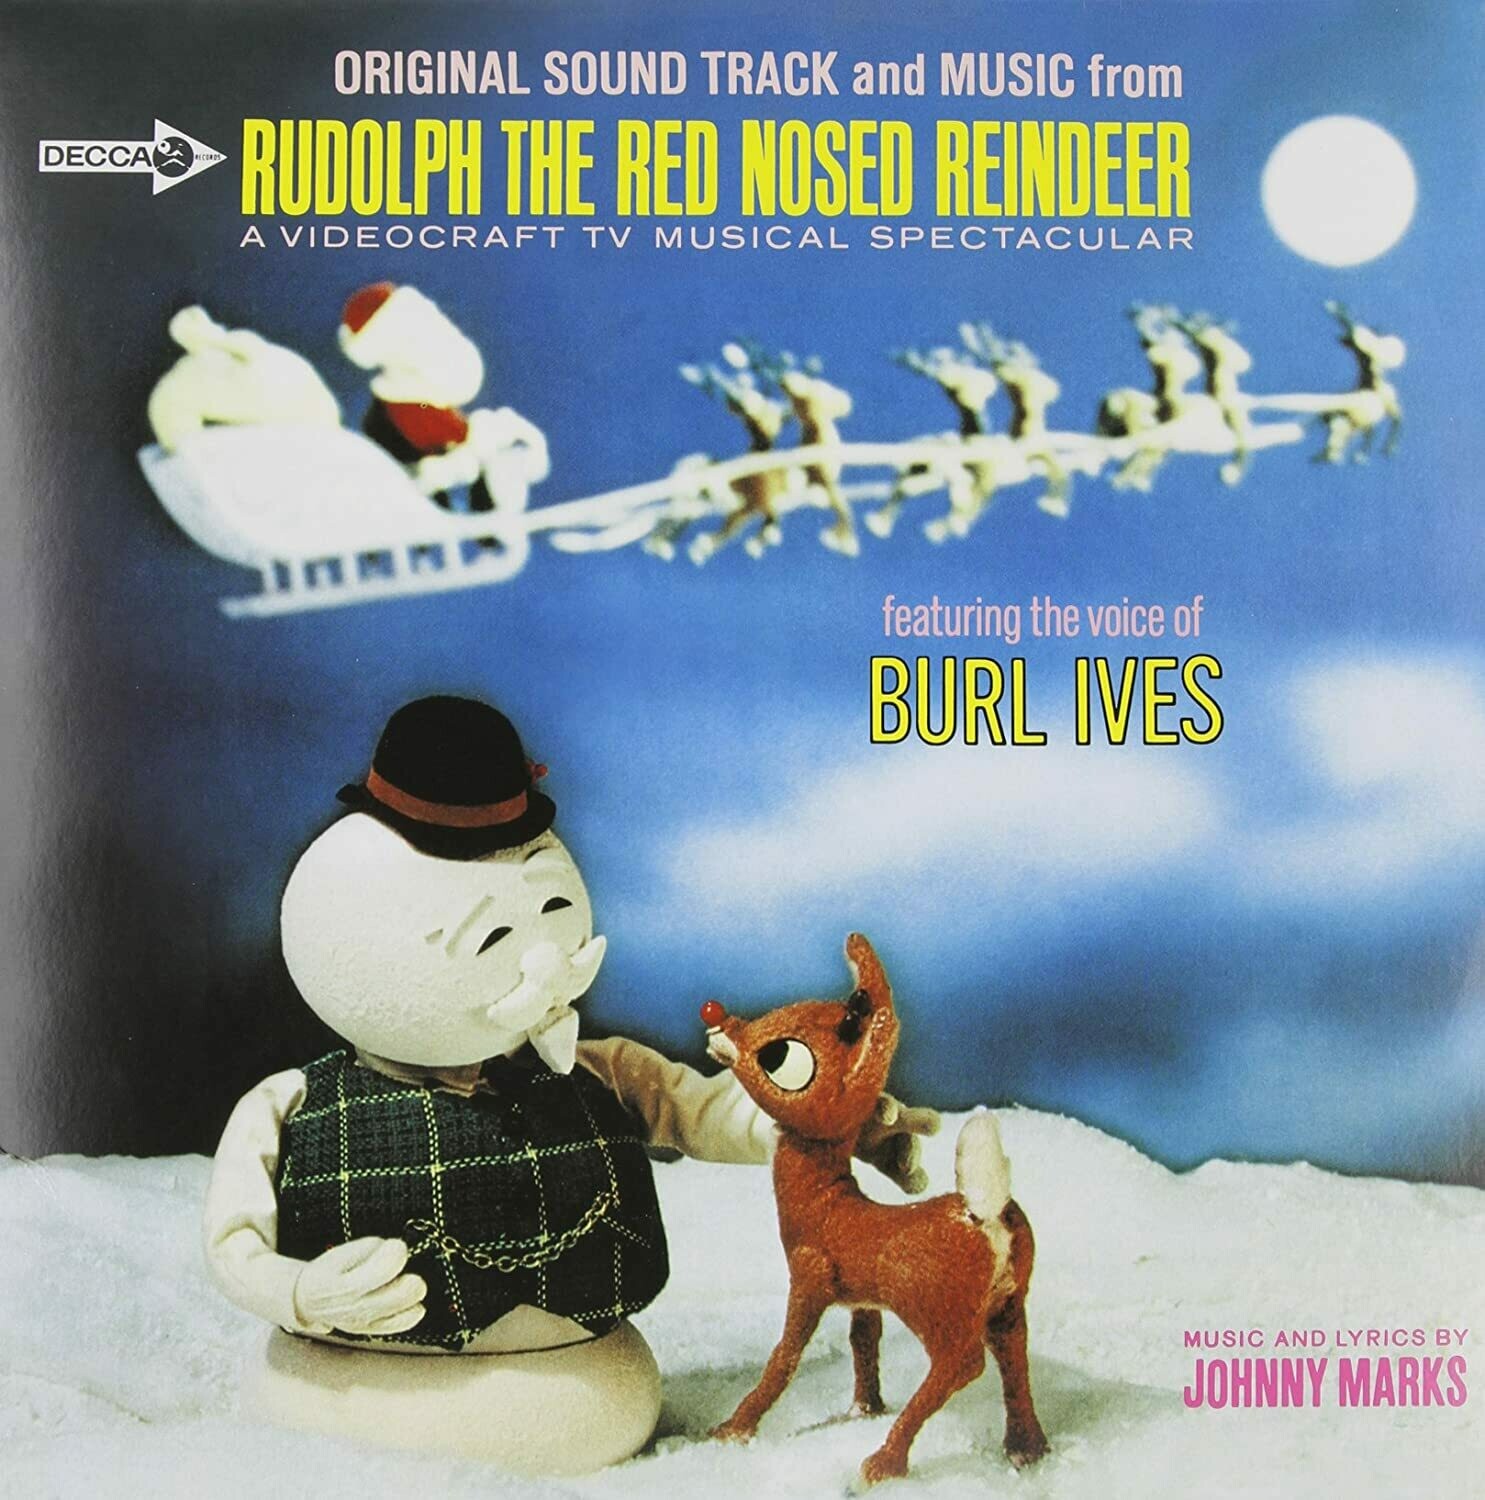 Burl Ives "Rudolph The Red Nosed Reindeer"